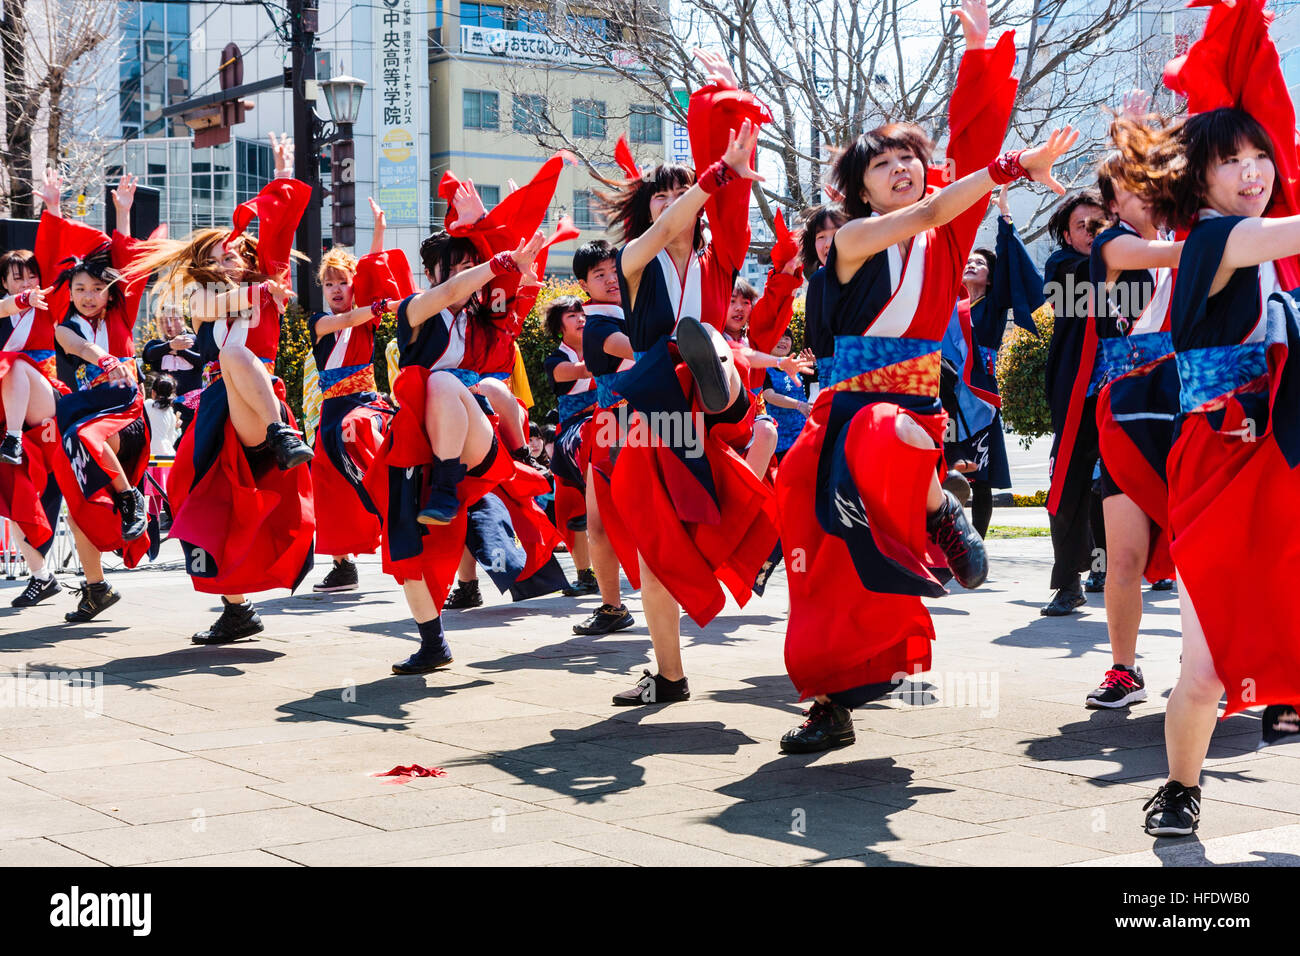 Japanese Yosakoi dance Festival. Young women dancers in red and blue  traditional yukata jackets, formation dancing in city square Stock Photo -  Alamy